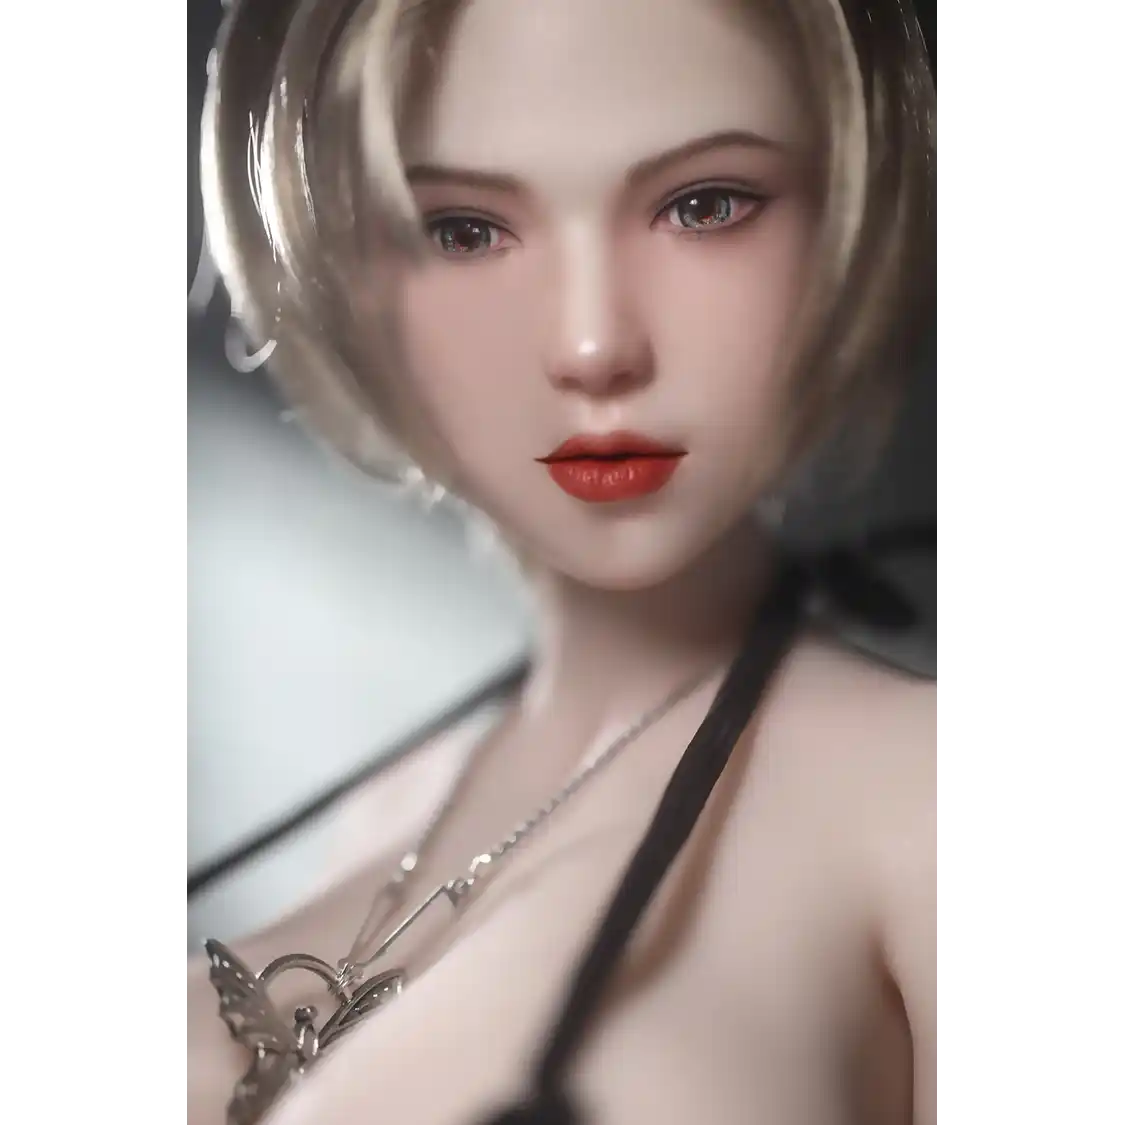 1ft 11in 60cm white female mini silicone sex doll with blonde hair, light skin and extra large breasts.